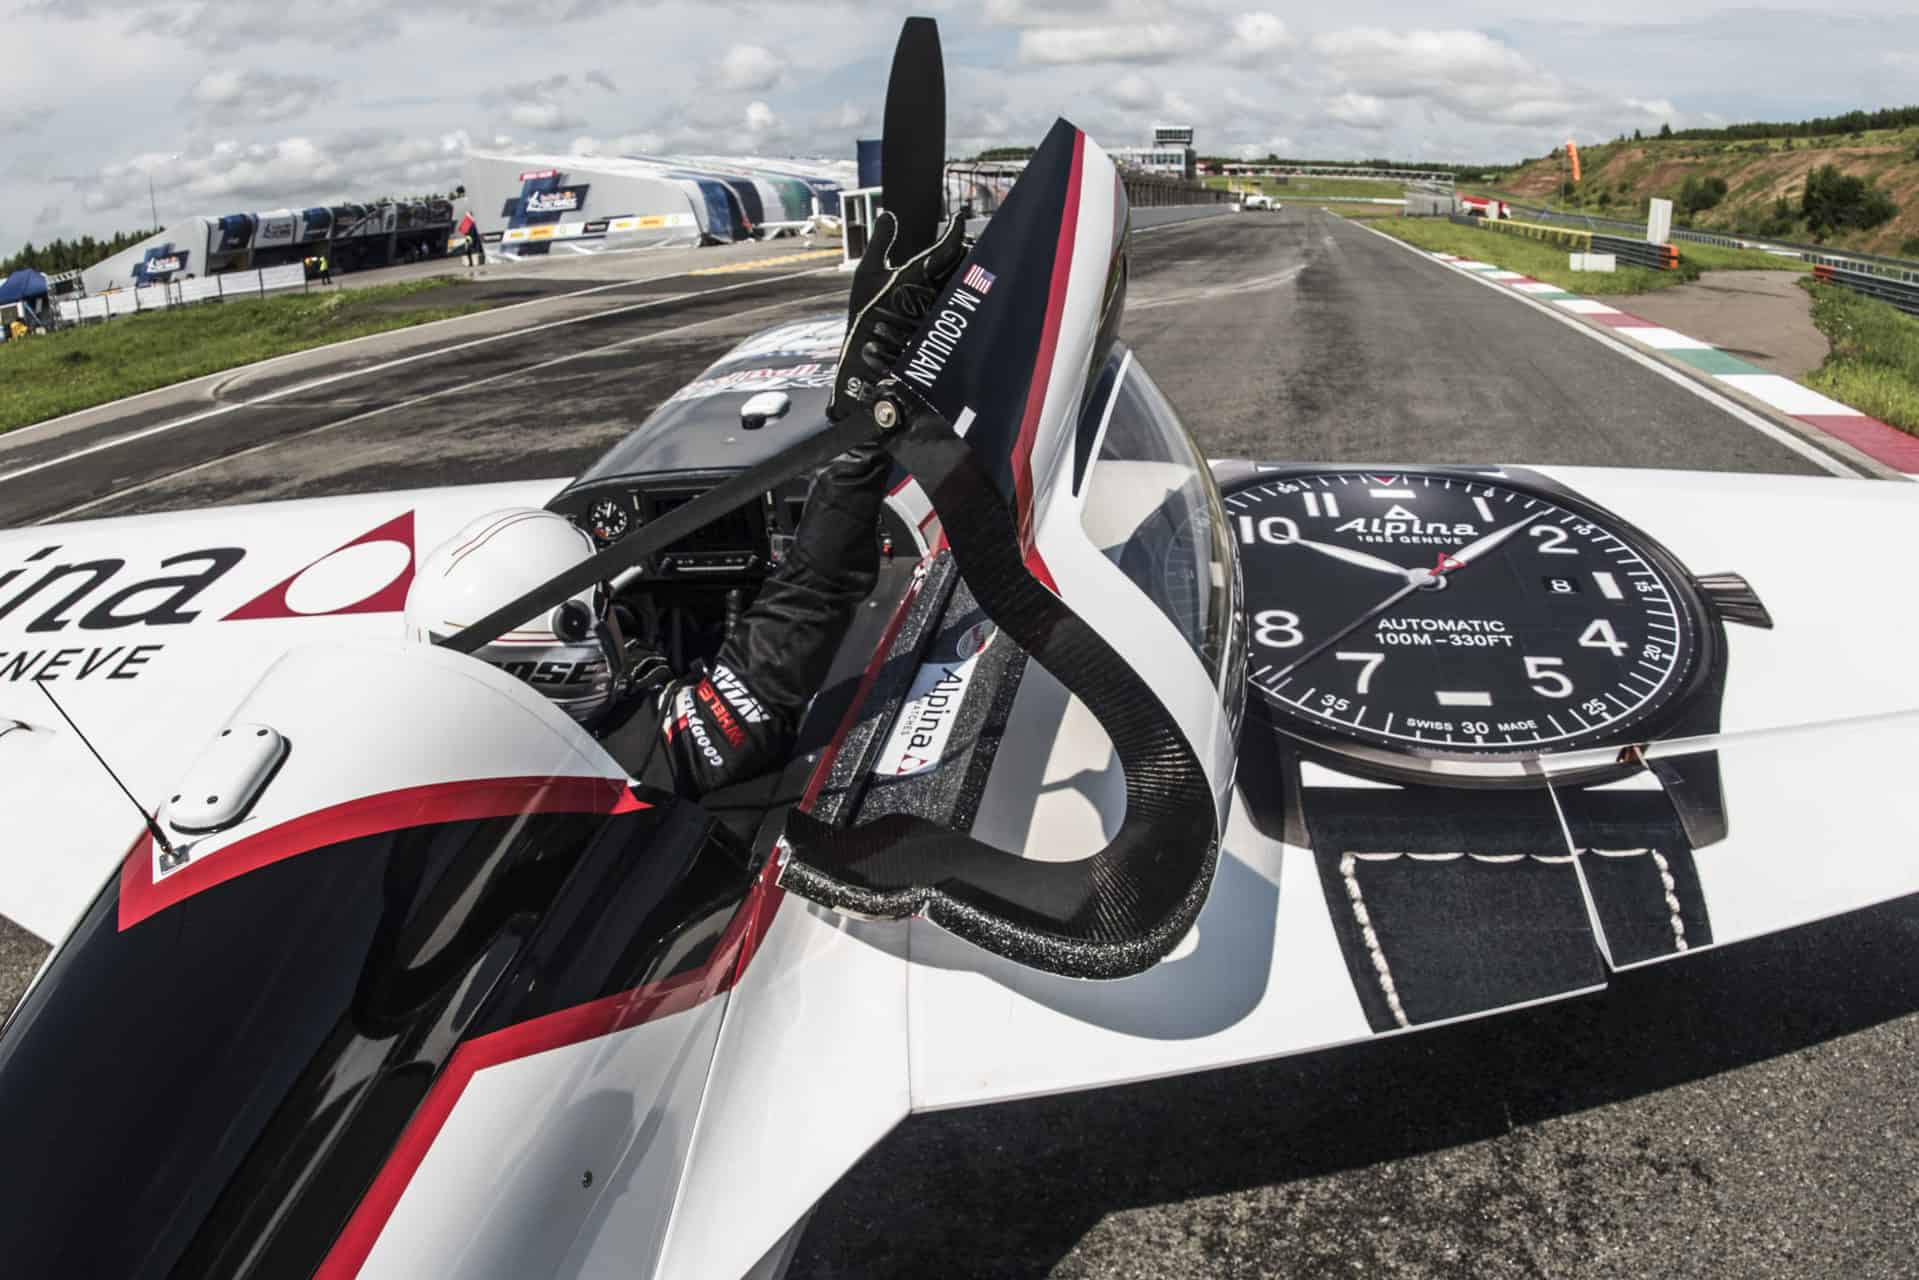 Michael Goulian Team Partner at the 2018 Red Bull Air Race World Championship